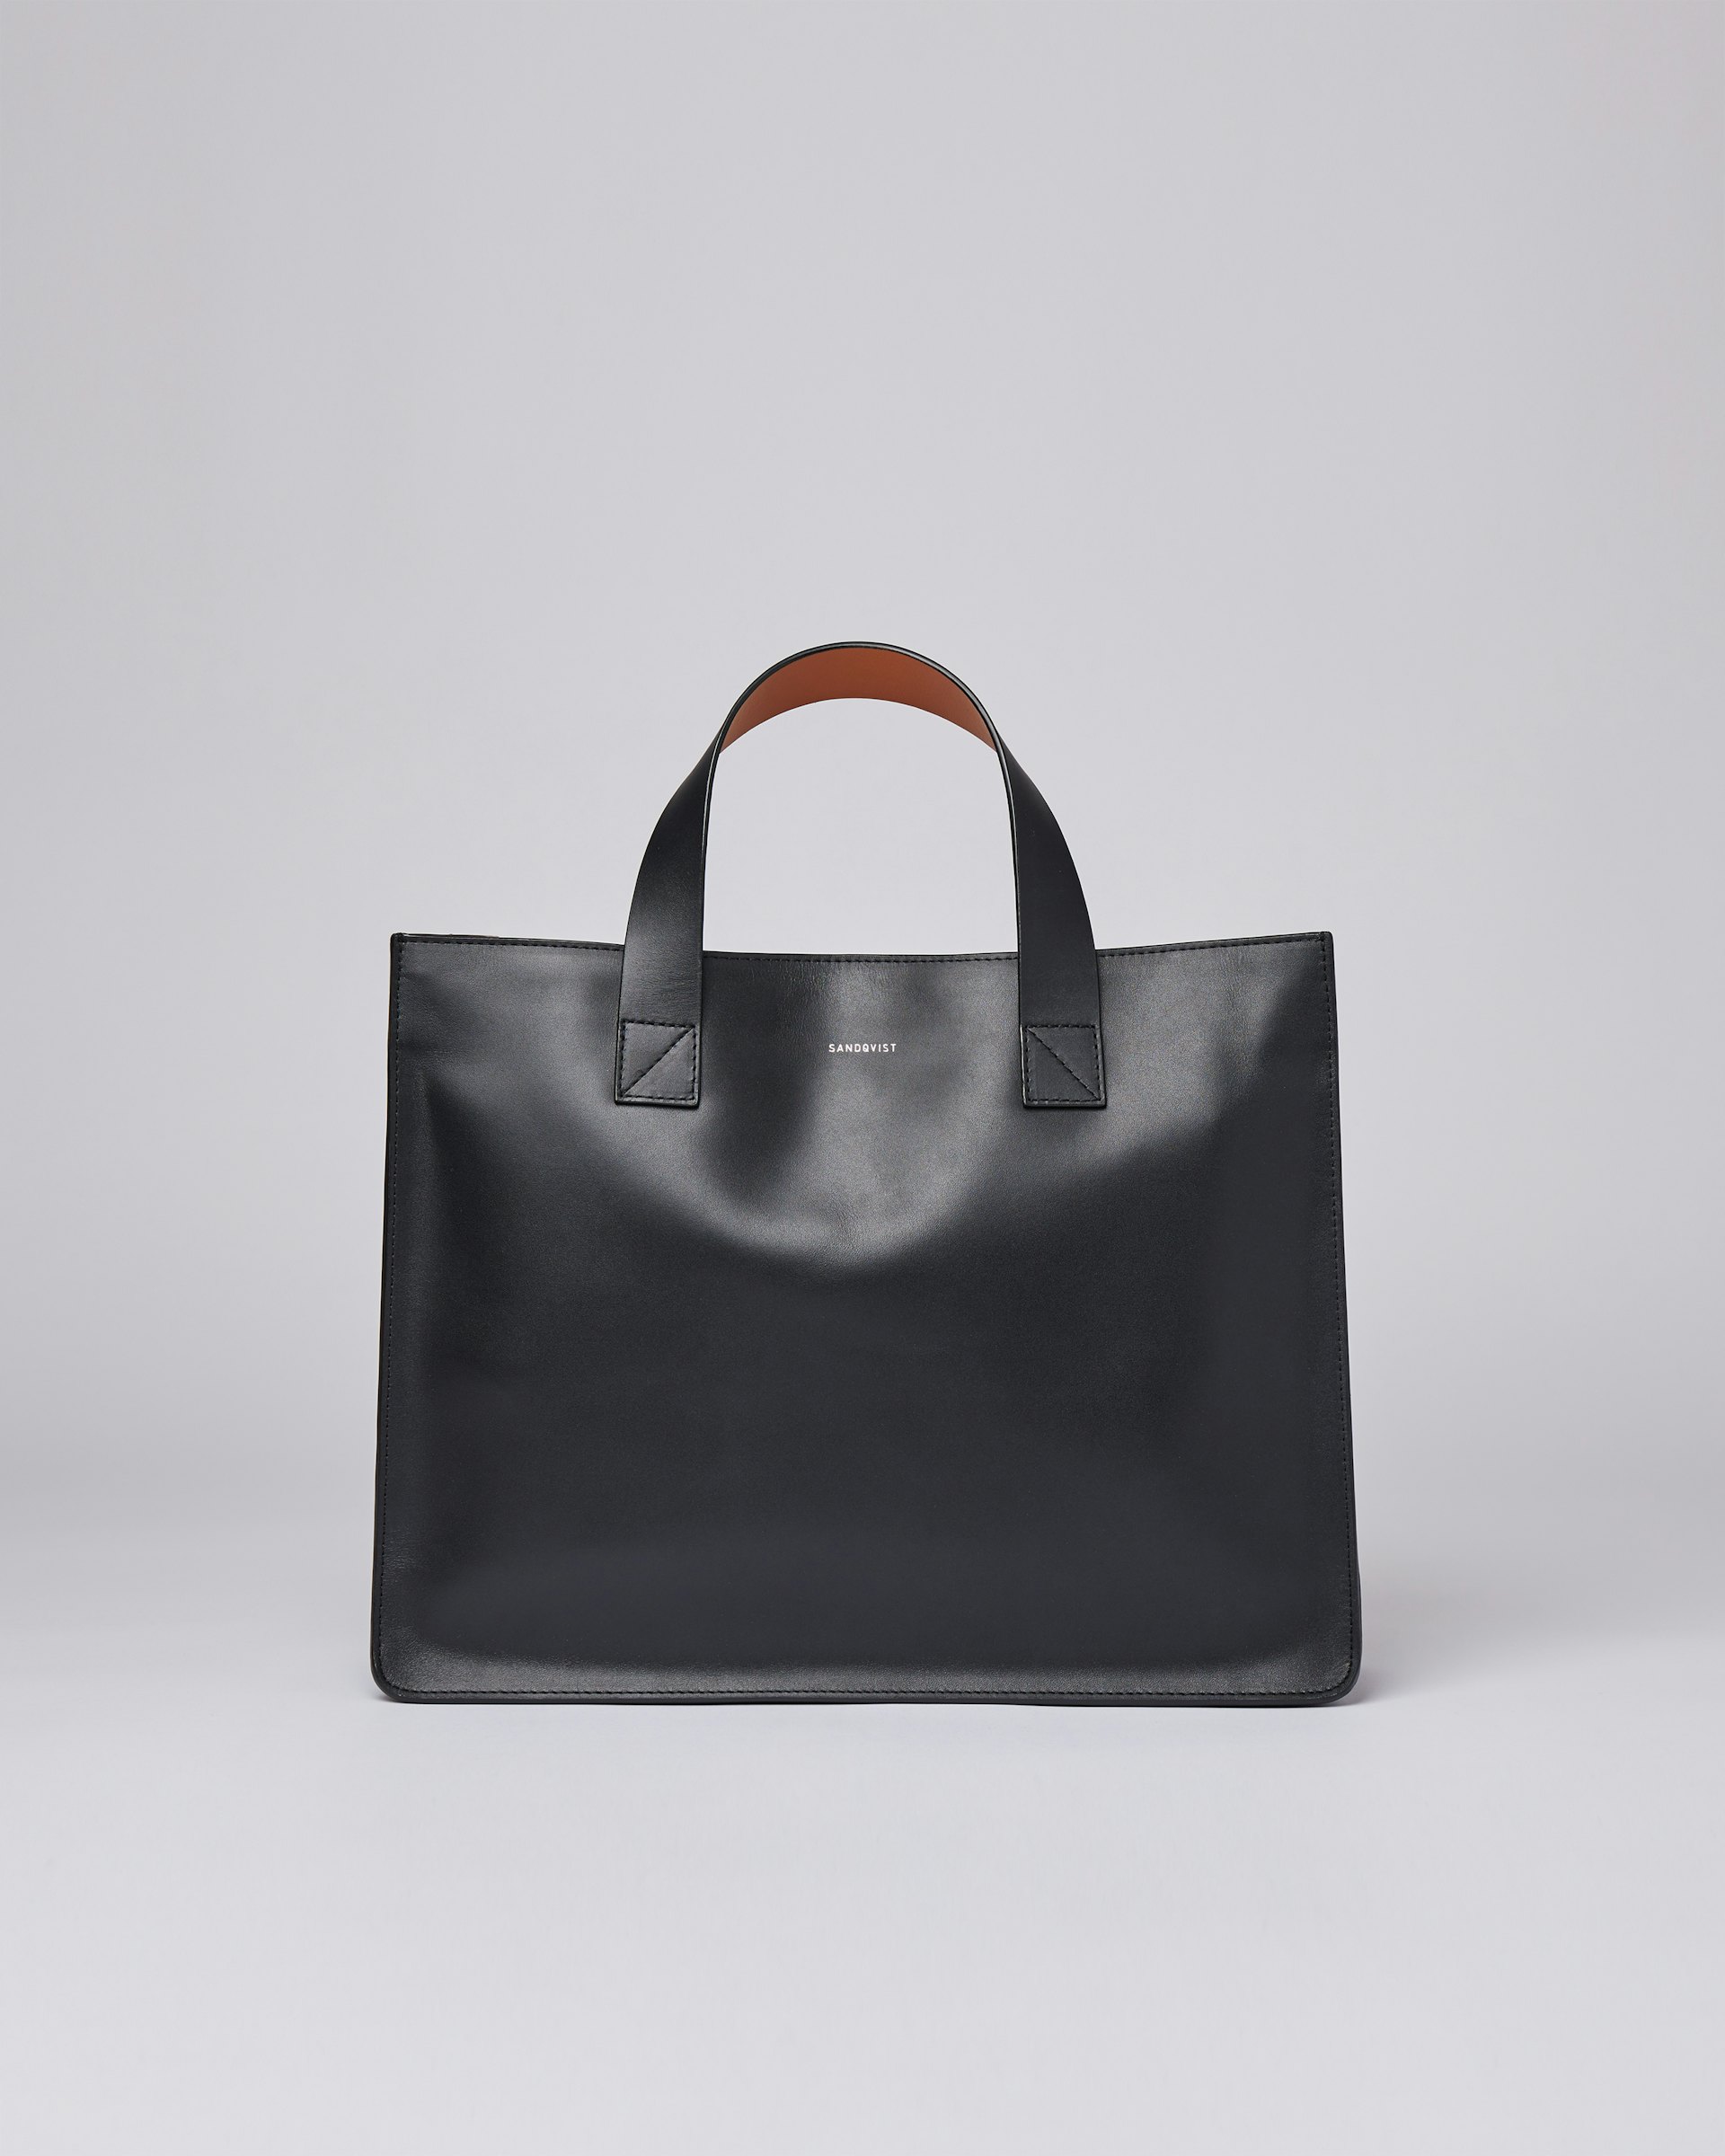 Edie belongs to the category Tote bags and is in color svart